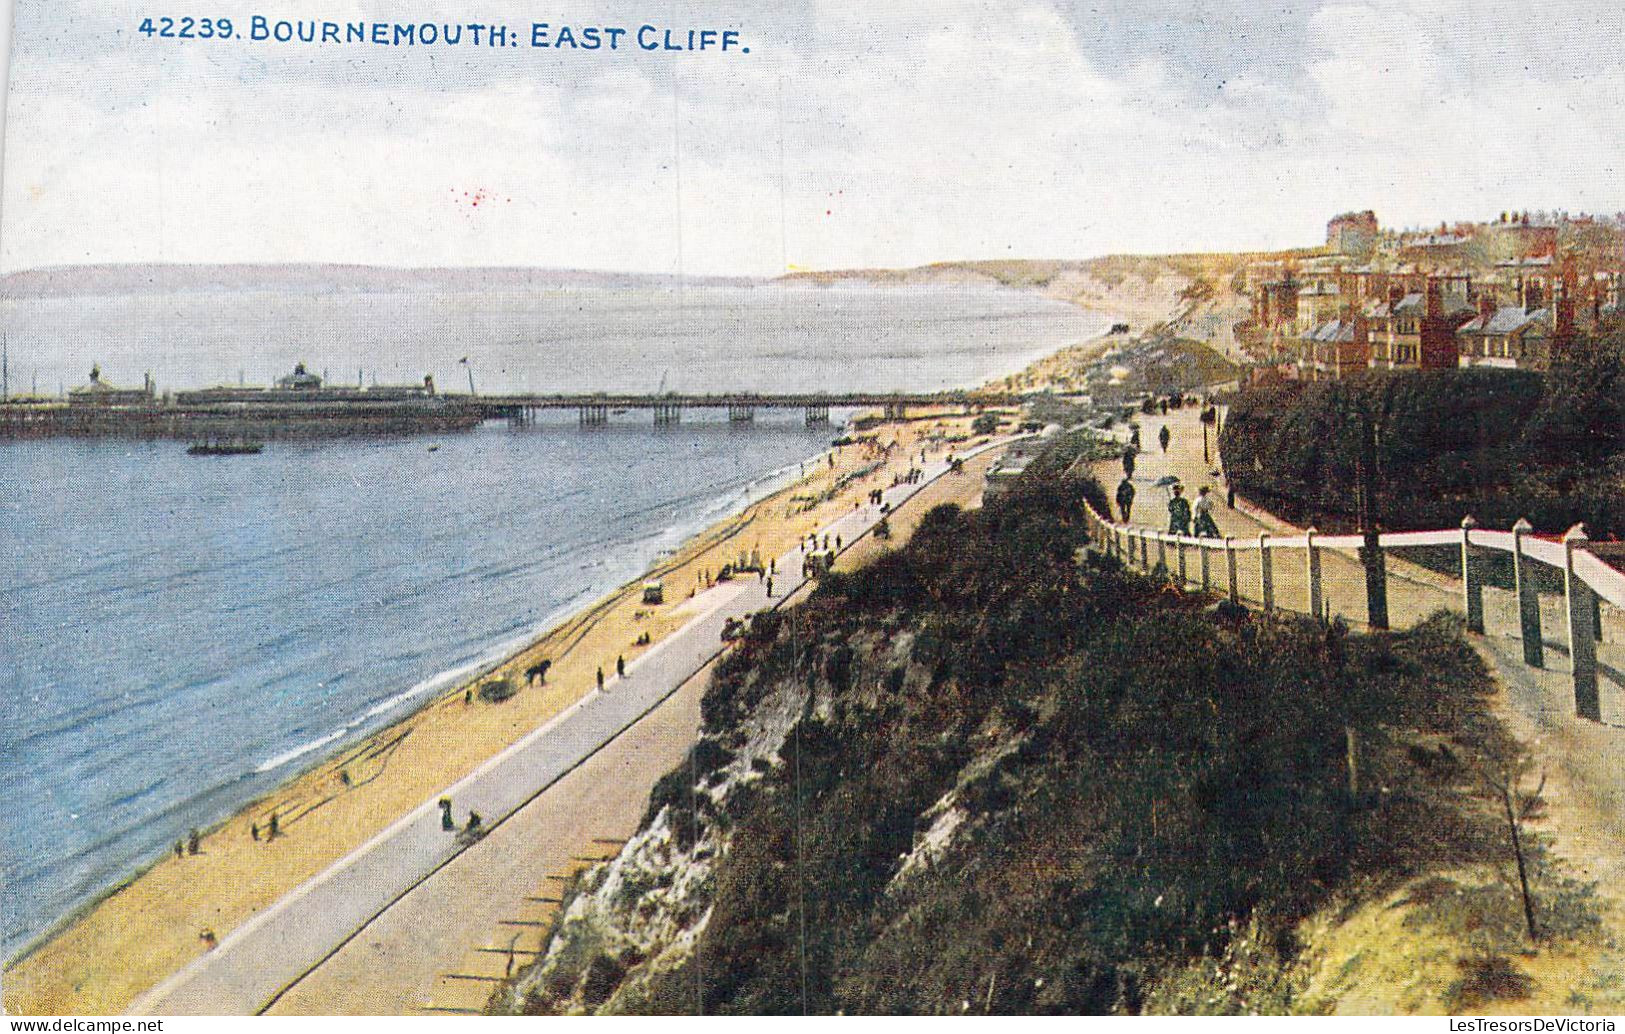 ANGLETERRE - Bournemouth - East Cliff - Carte Postale Ancienne - Bournemouth (depuis 1972)